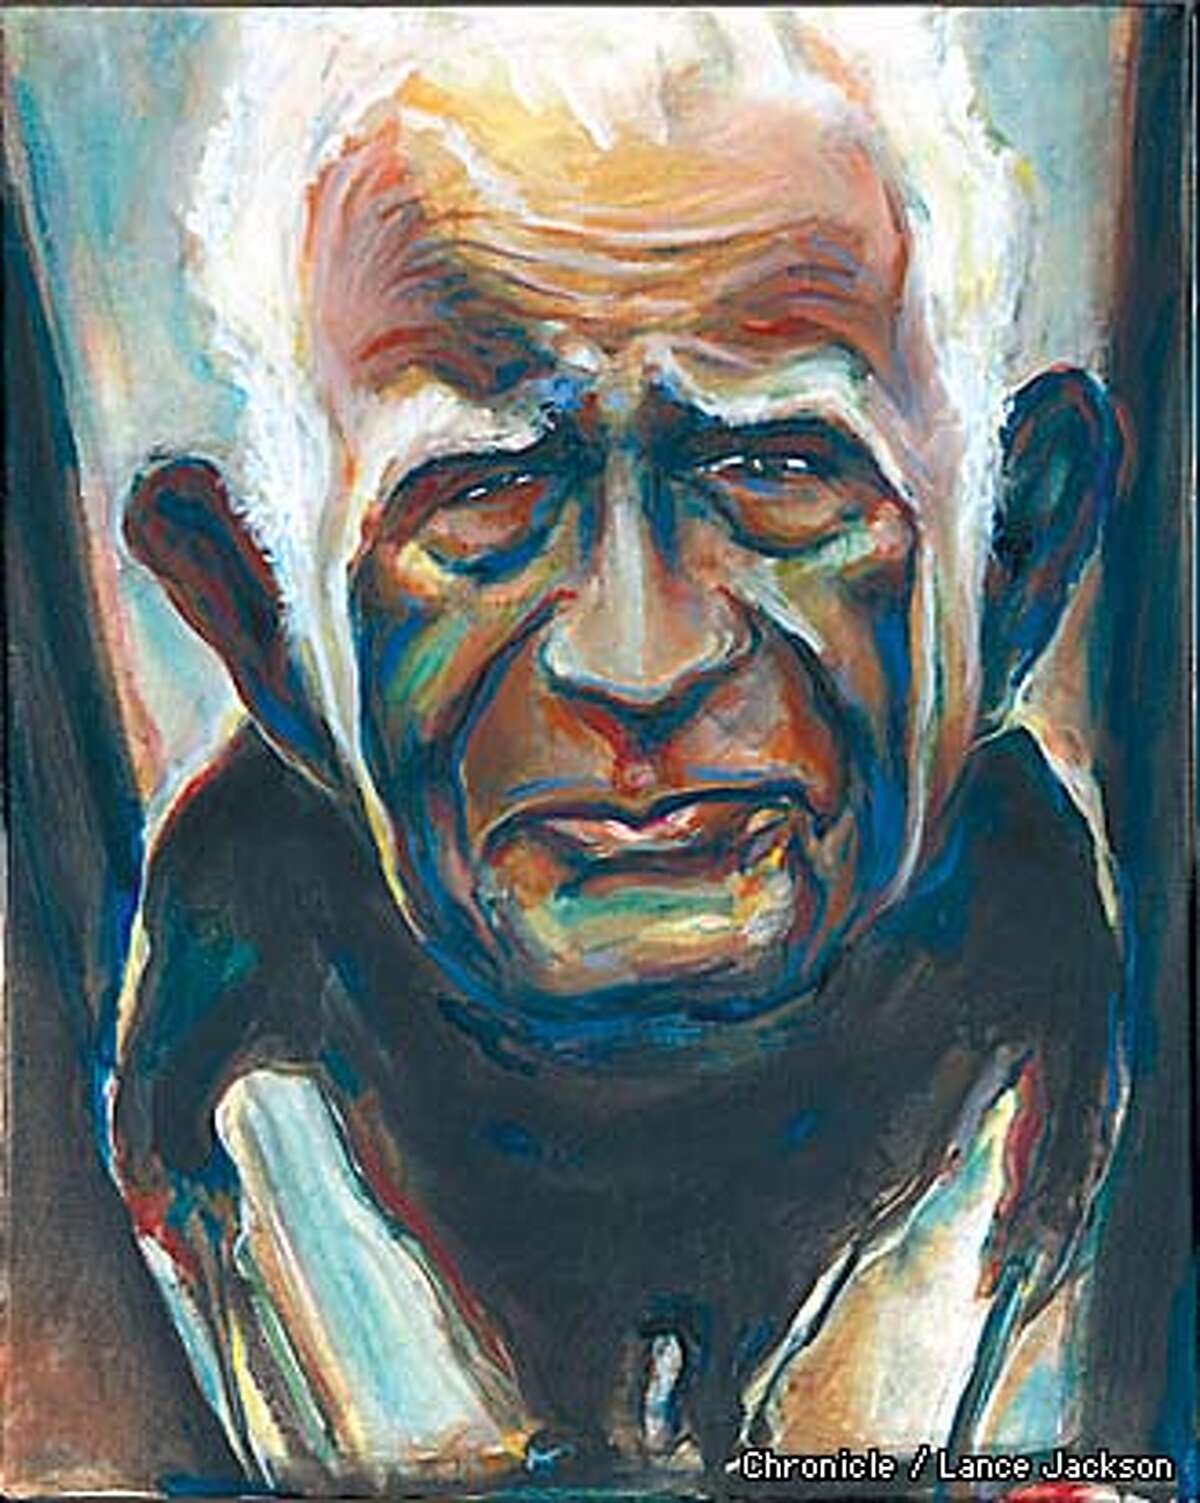 Norman Mailer painting